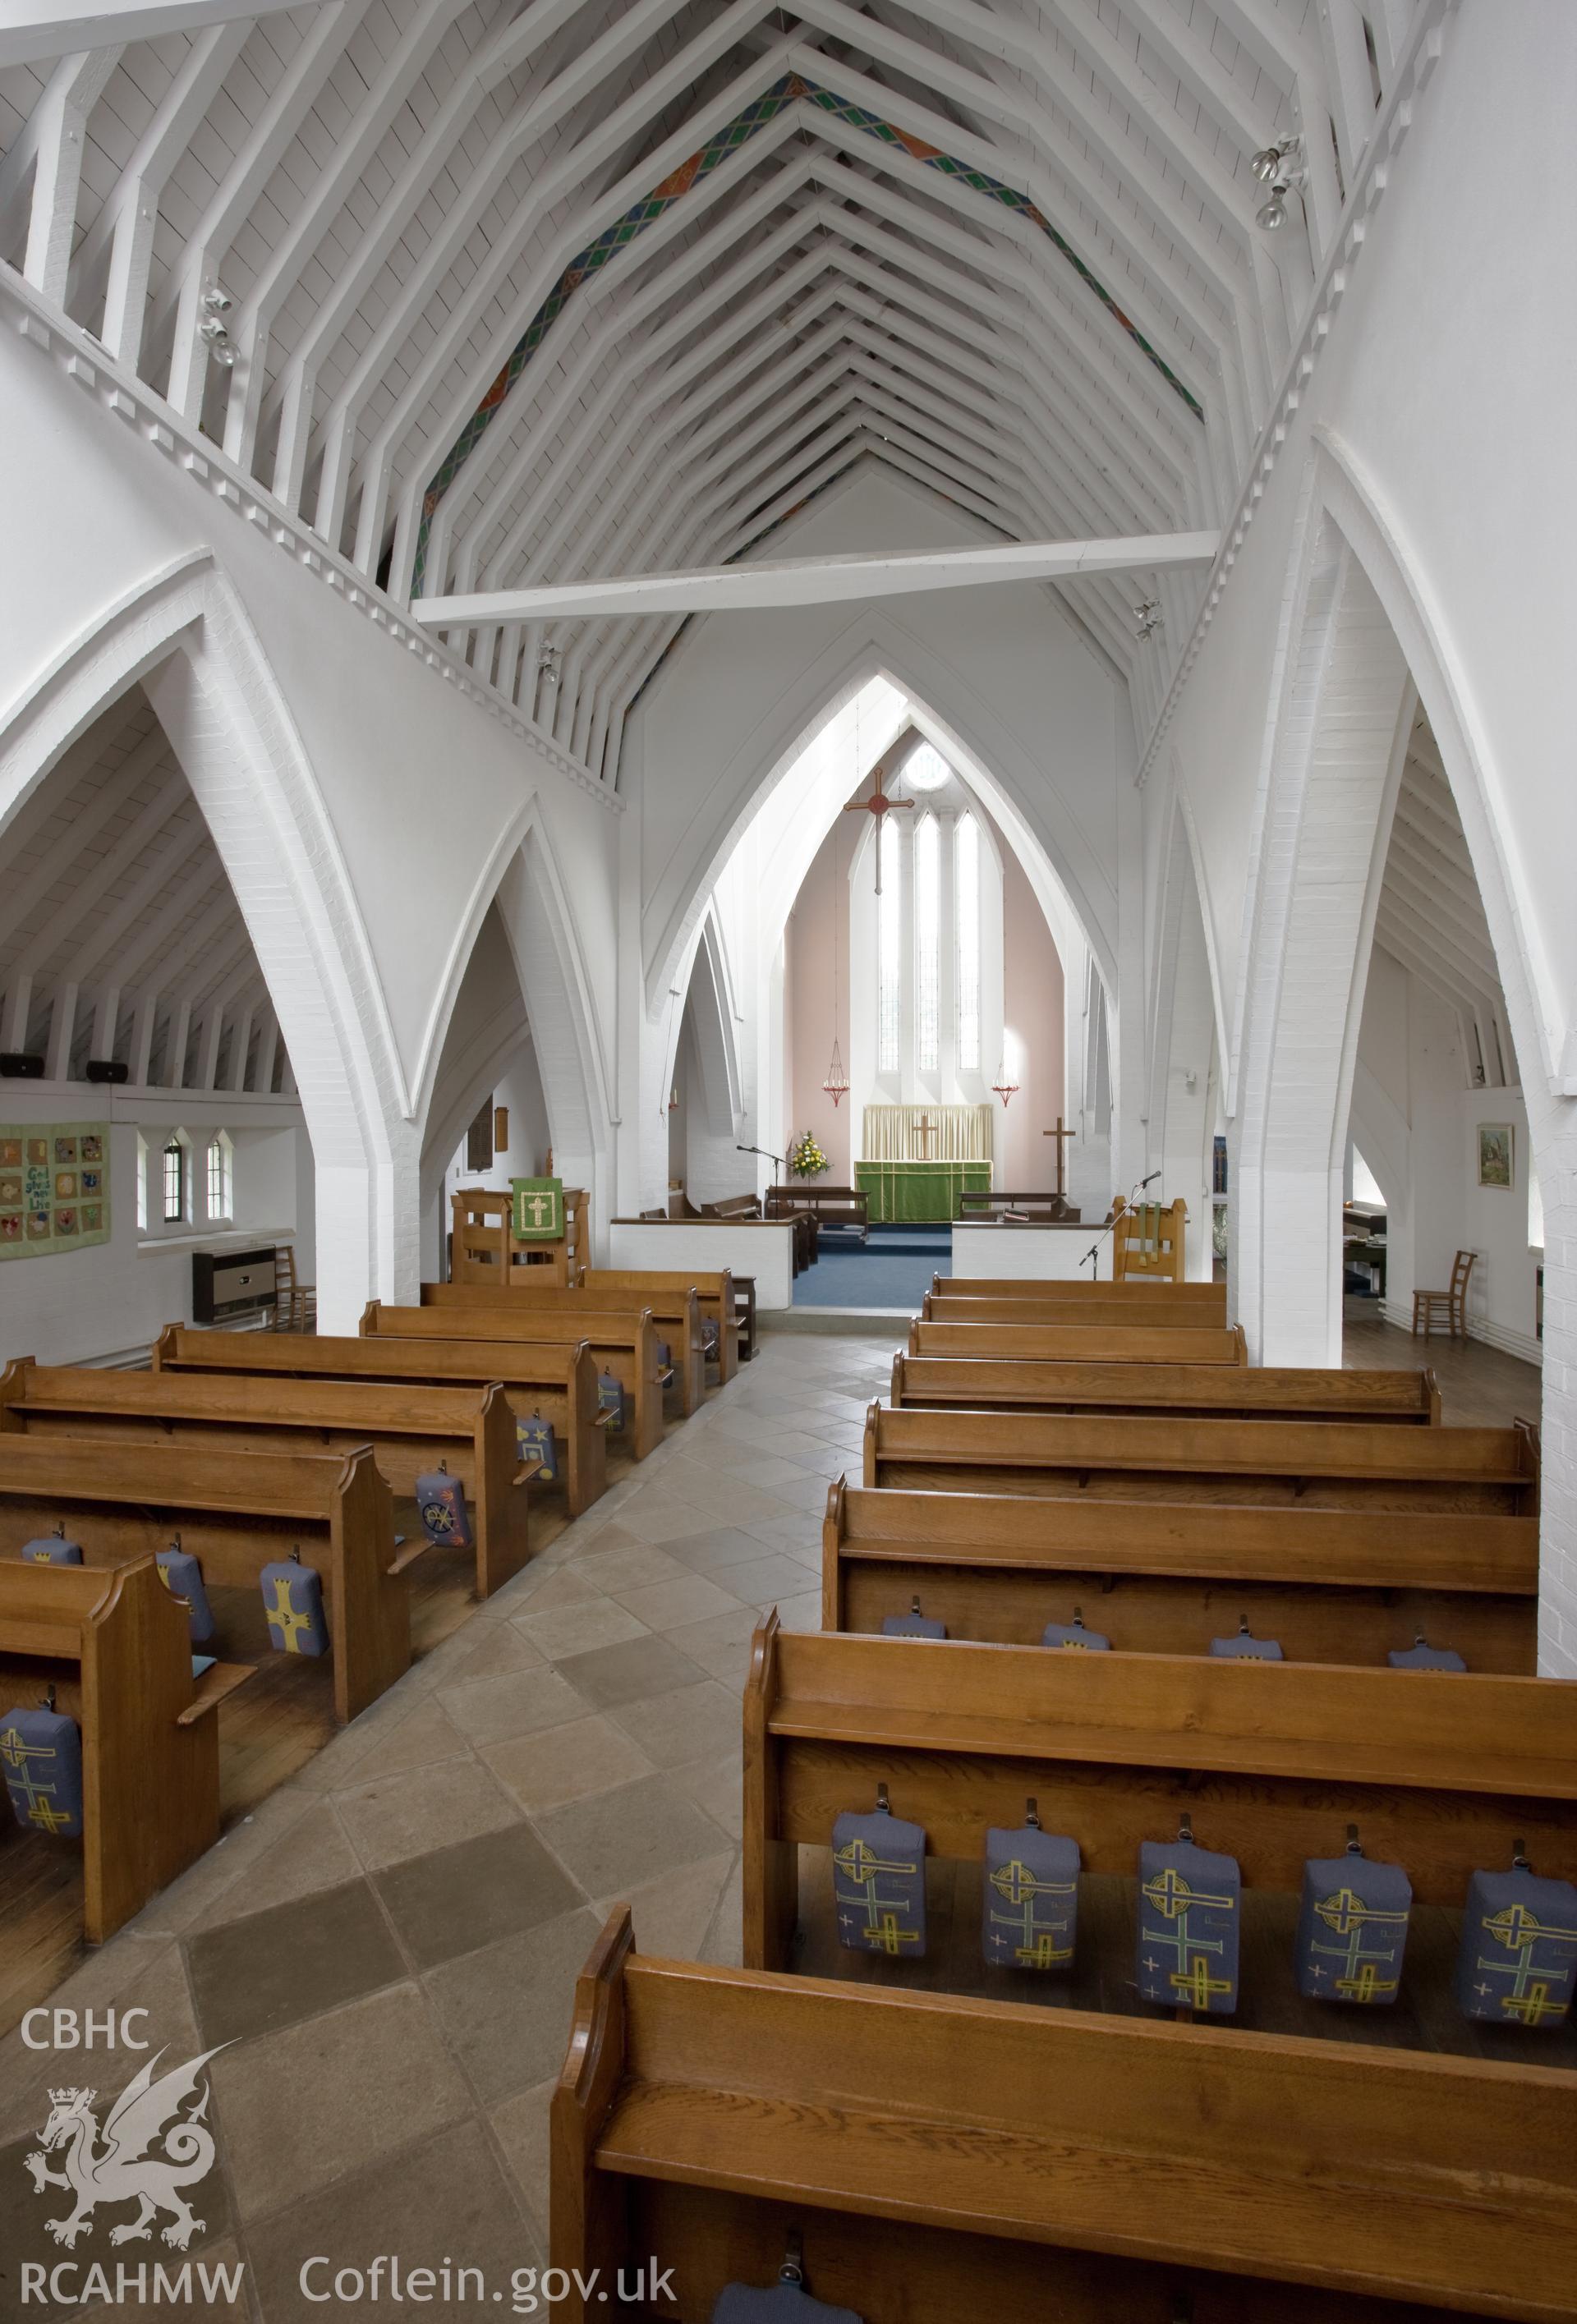 Nave from the west.